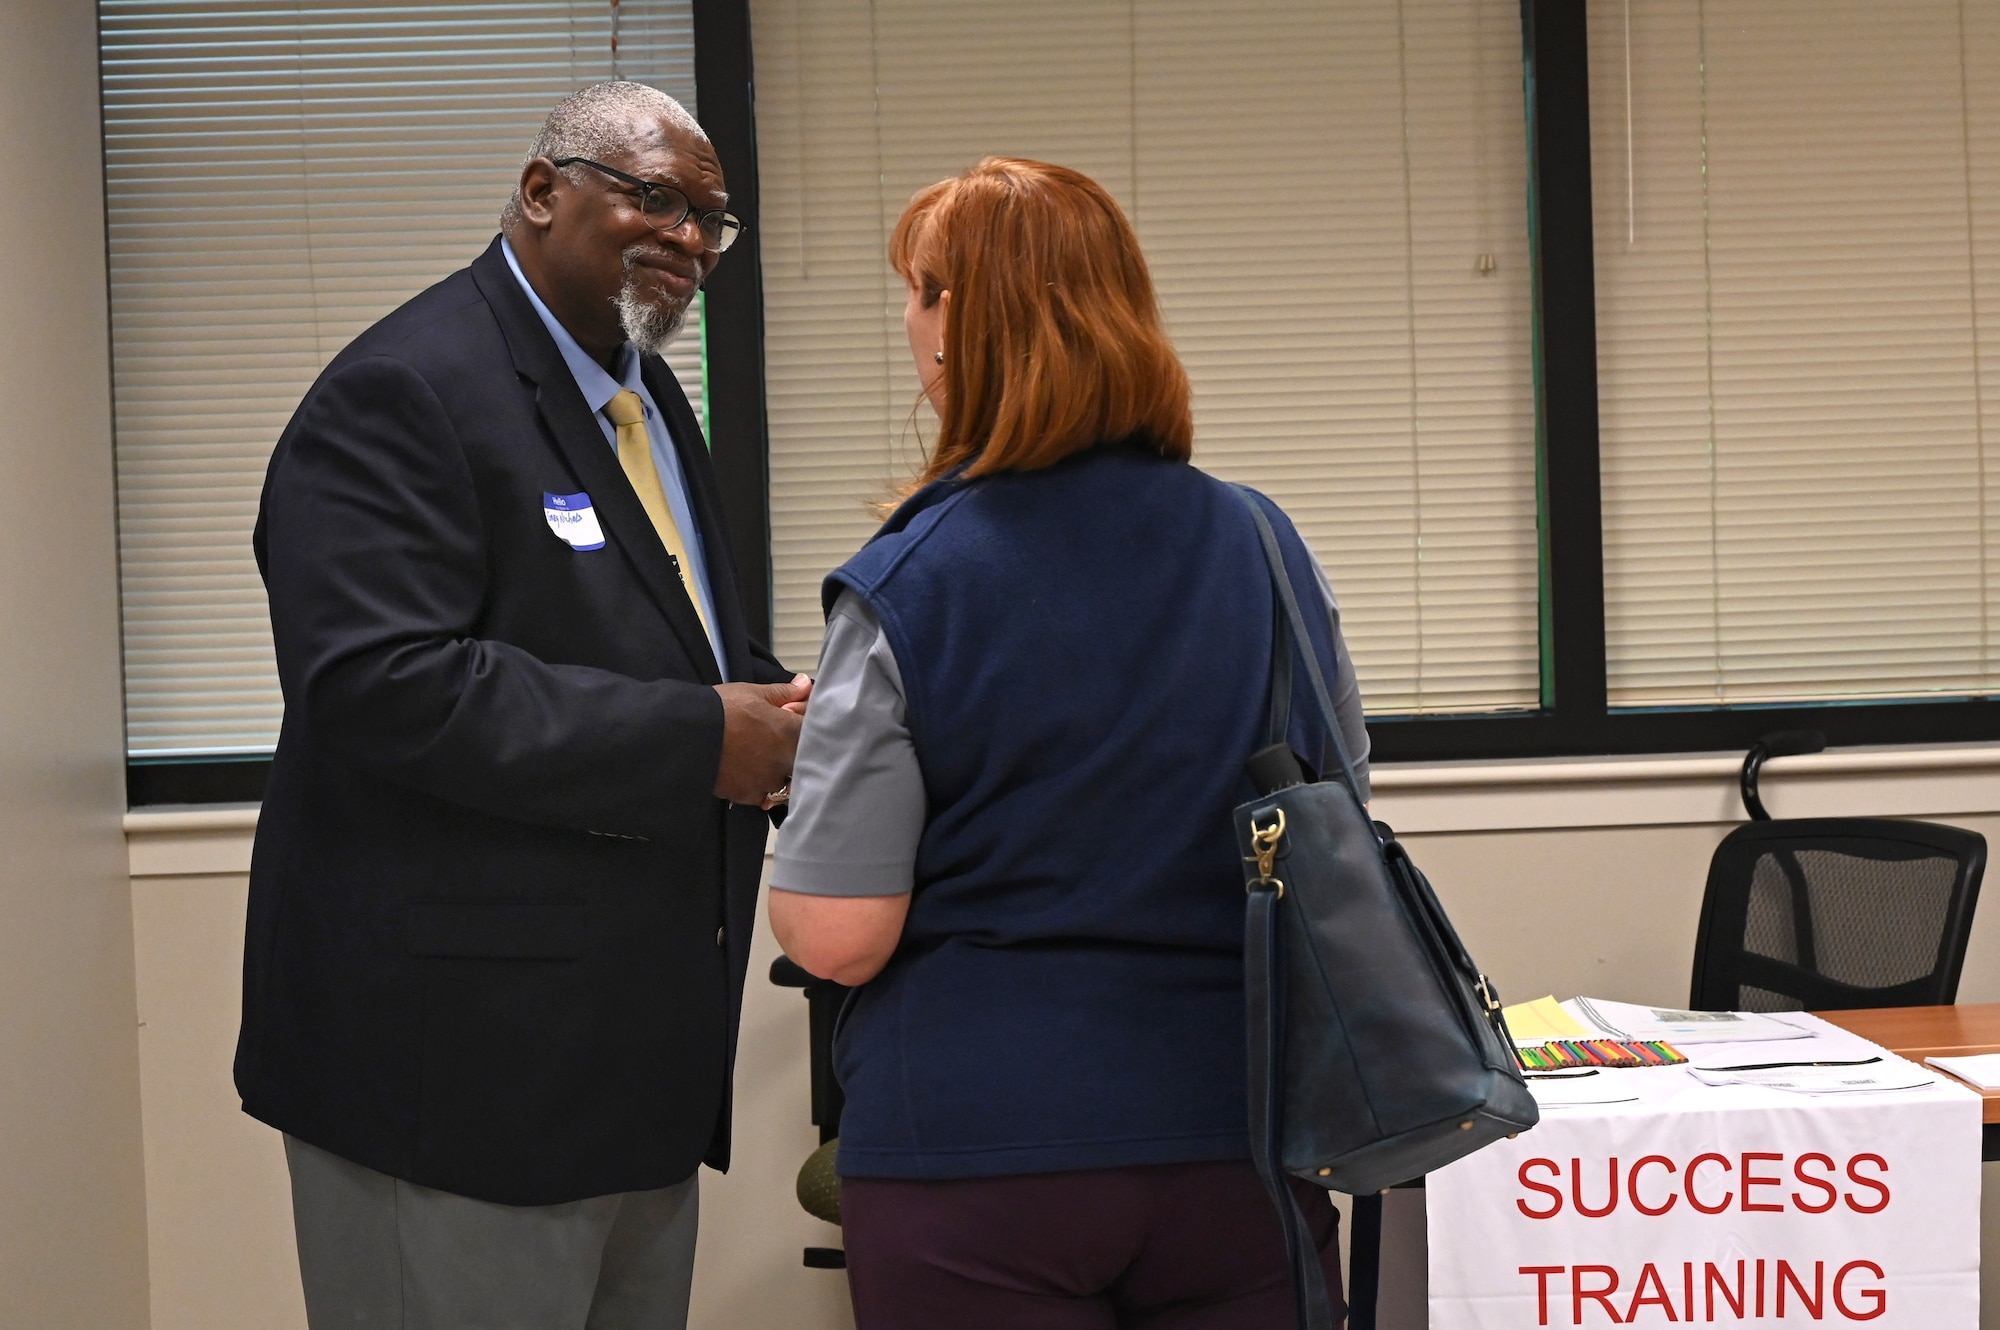 A member of Team Little Rock speaks with a local business vendor during a vendor fair and pitch day event